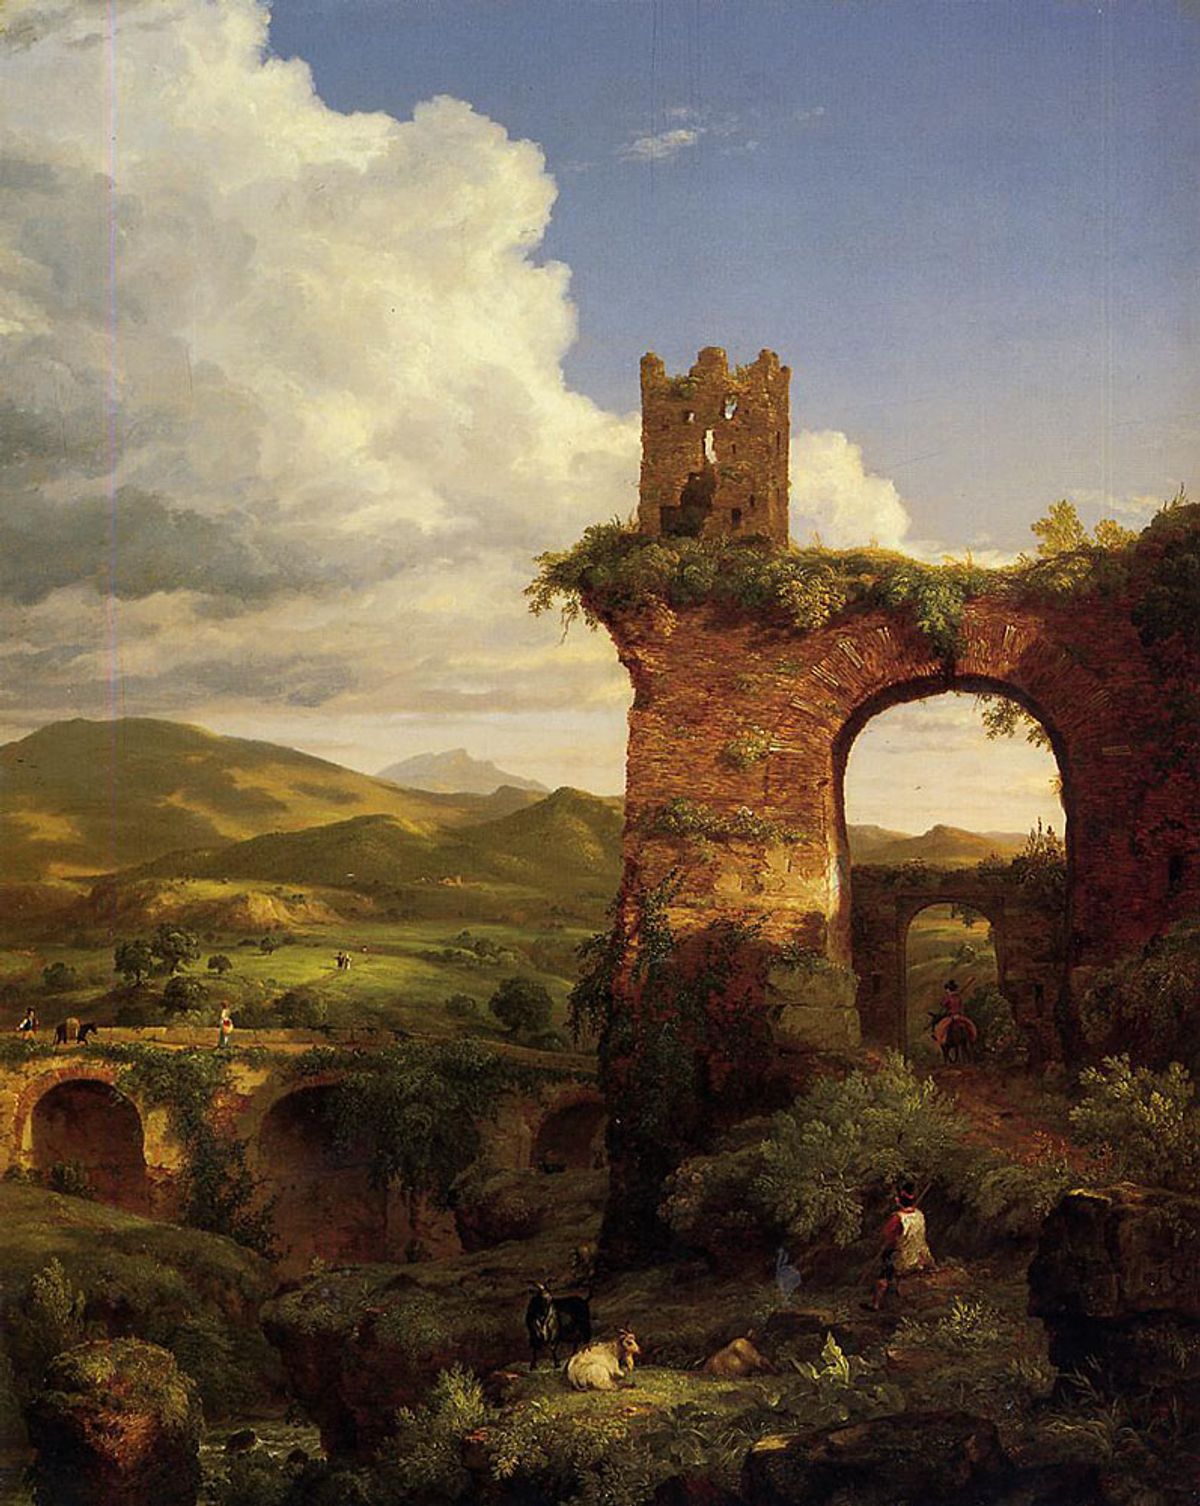 Thomas Cole's The Arch of Nero (1846), sold by the Newark Museum of Art 